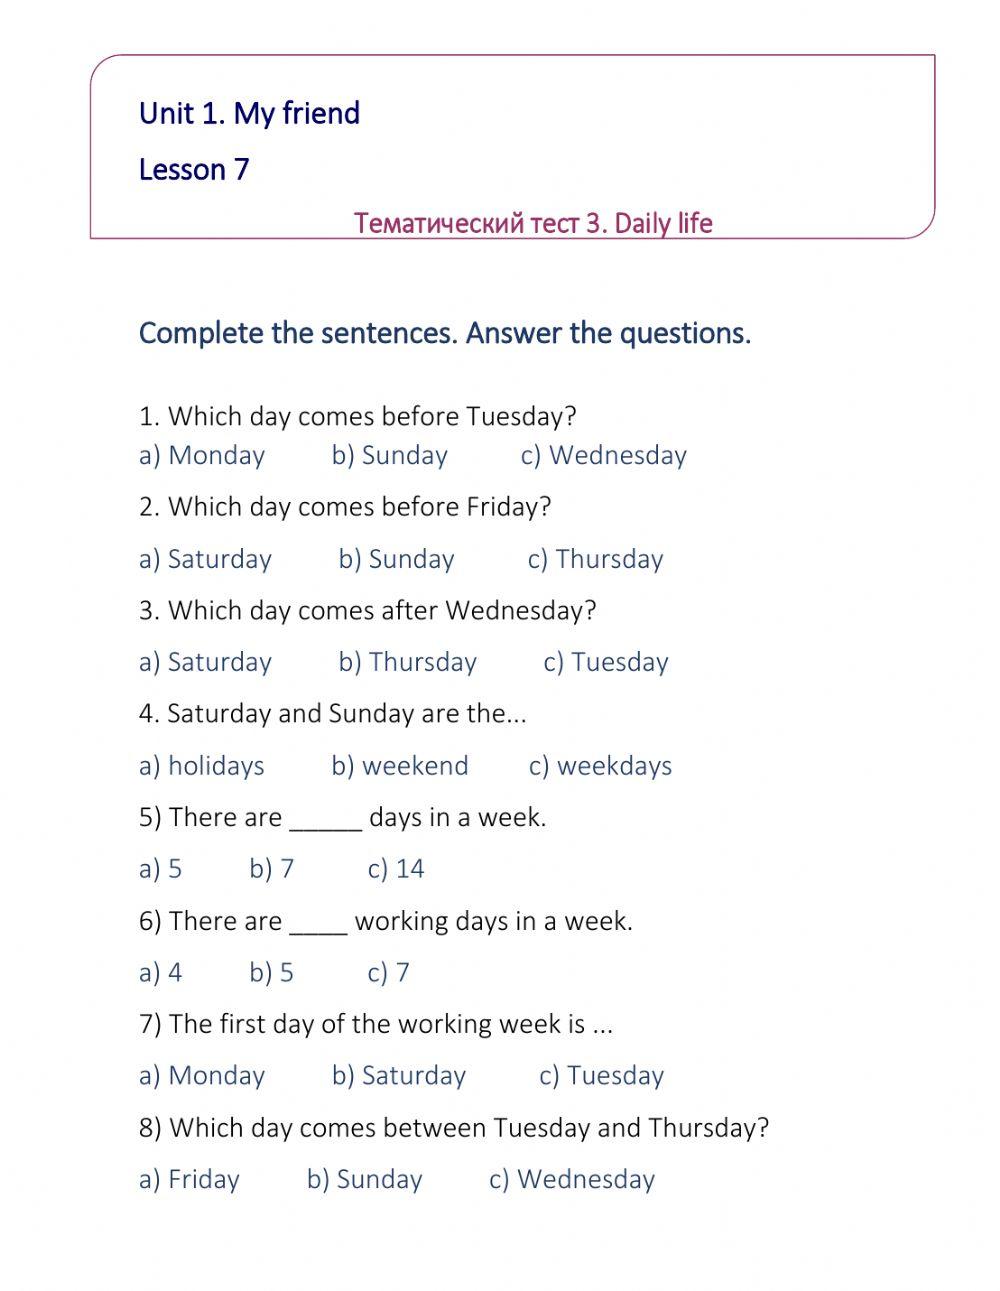 English-4-Unit 1-Lesson 7 Тематический тест 3 «Daily life». Complete the sentences. Answer the questions